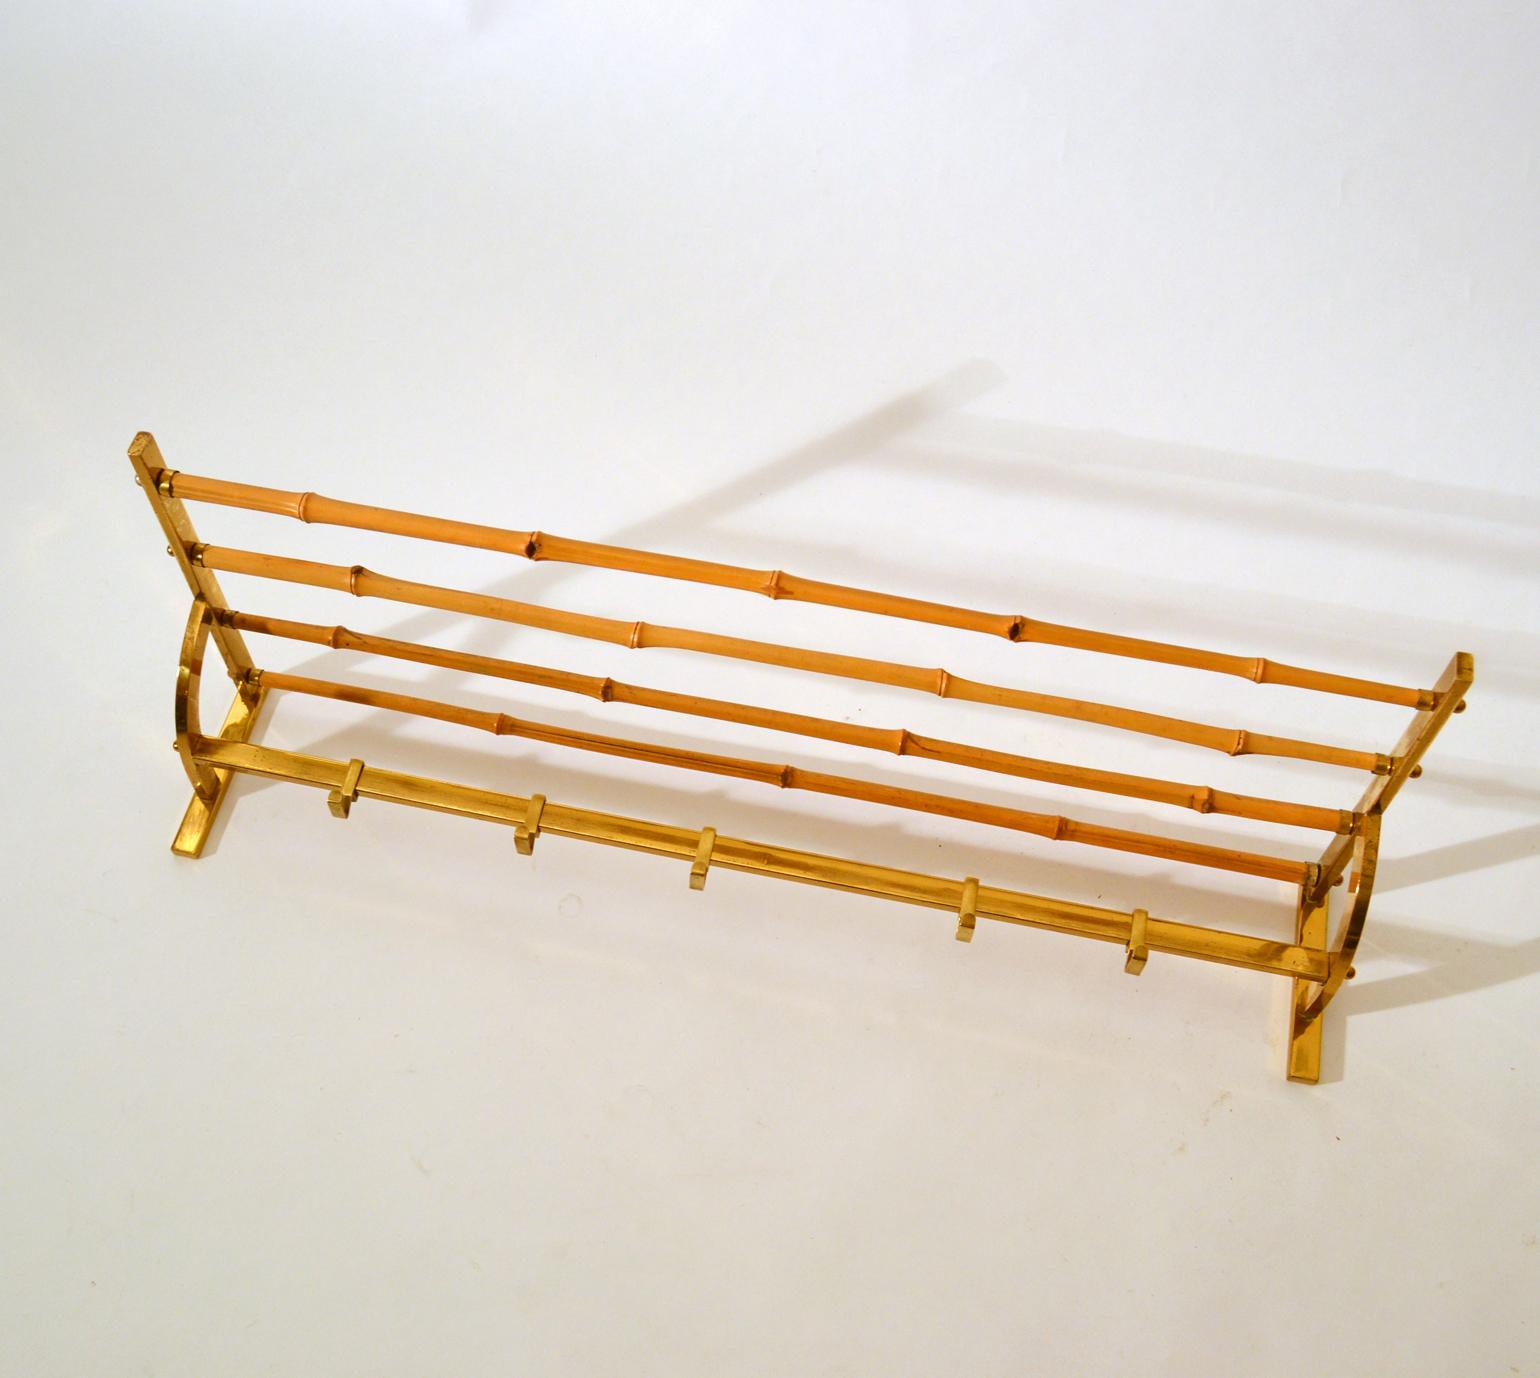 Wall mounted coat rack with five hooks in brass with bamboo hat rack attached.